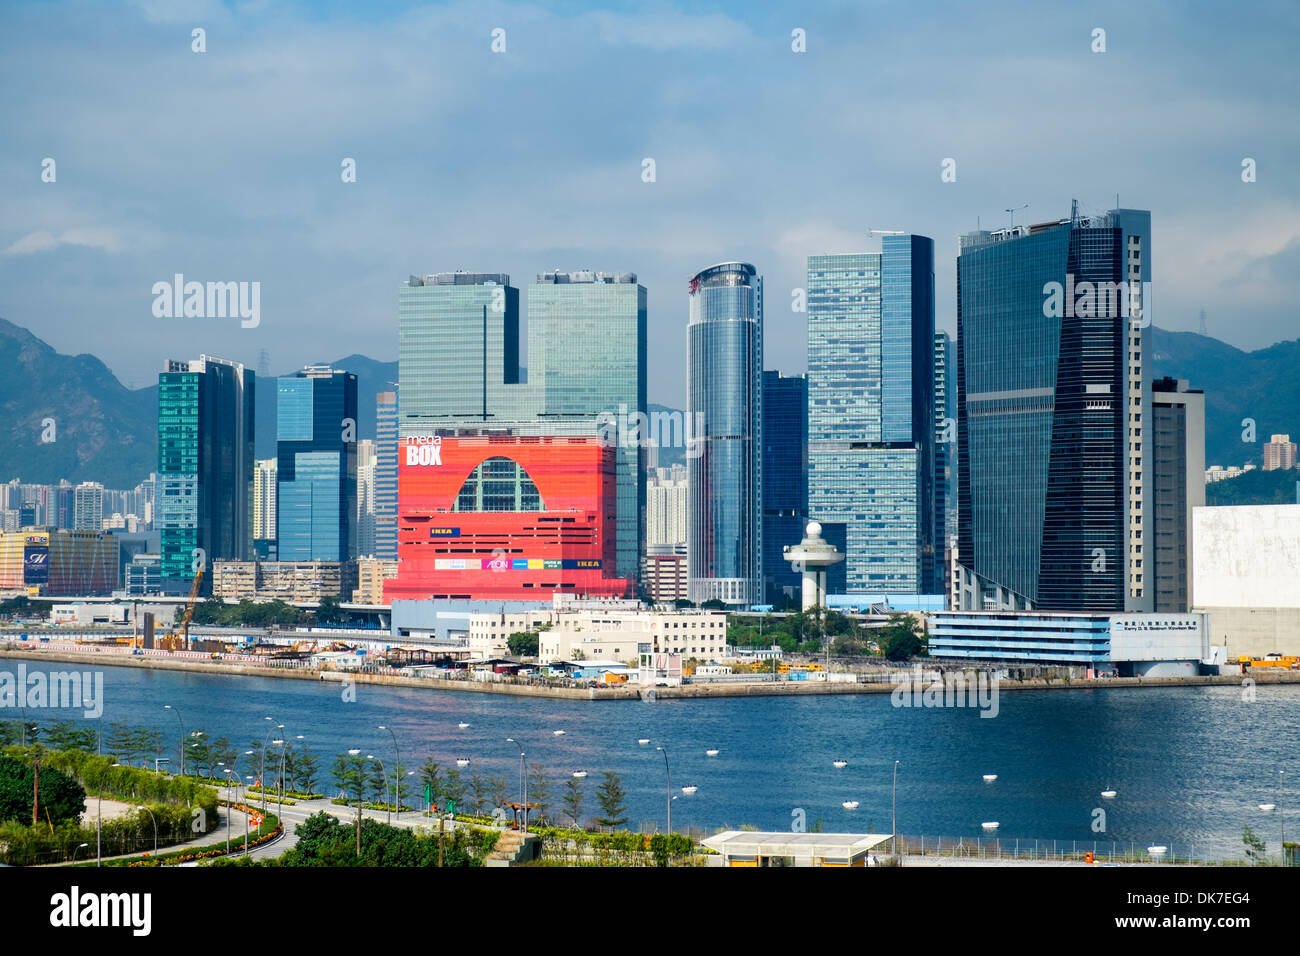 View of dense urban cityscape and high-rise towers in Kowloon Bay Hong Kong Stock Photo